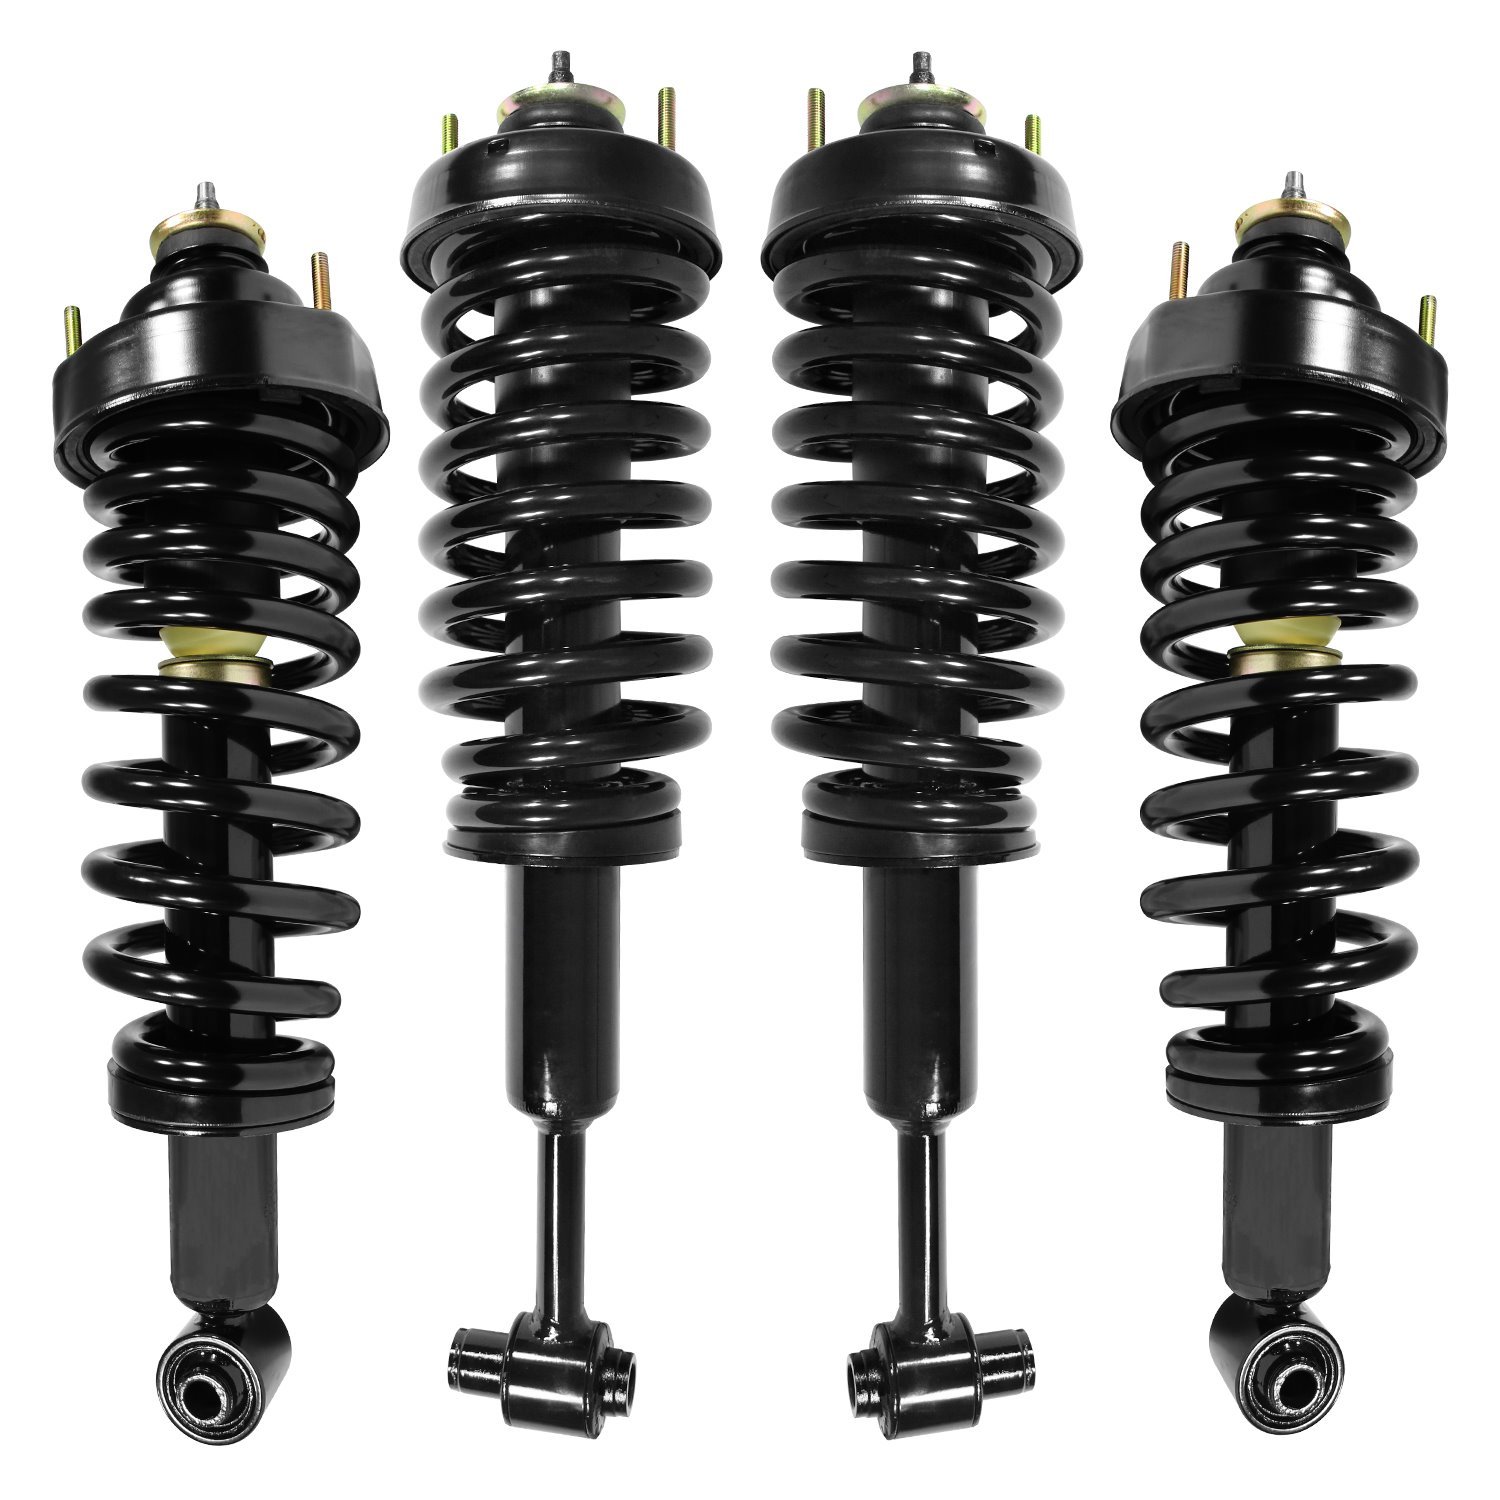 4-11160-15060-001 Front & Rear Suspension Strut & Coil Spring Assembly Kit Fits Select Ford Explorer, Mercury Mountaineer